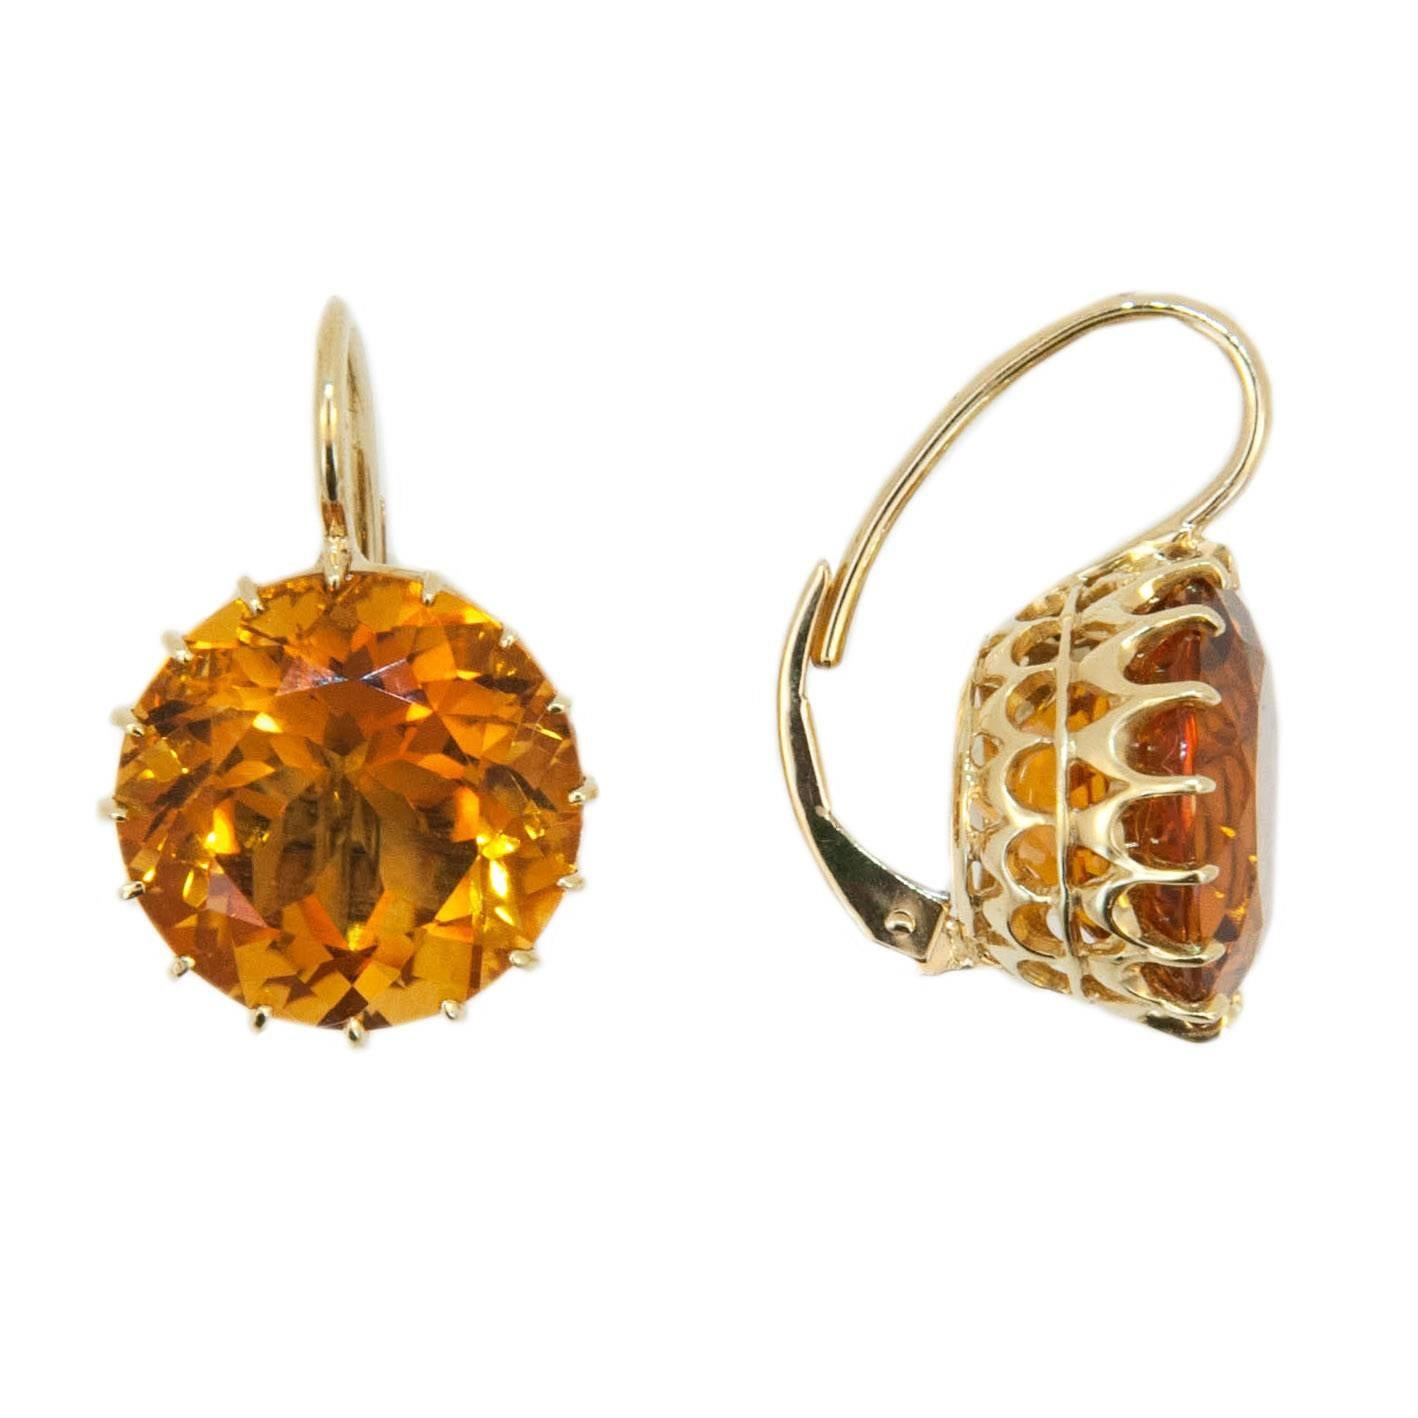 Gorgeous rich Honey colored Citrine earrings on a wire. Stones hand picked by Laura Munder. 18k yellow gold 13.9mm round Honey Citrine multi prong wire earrings. 17.59 carats total weight. Pierced leverback.